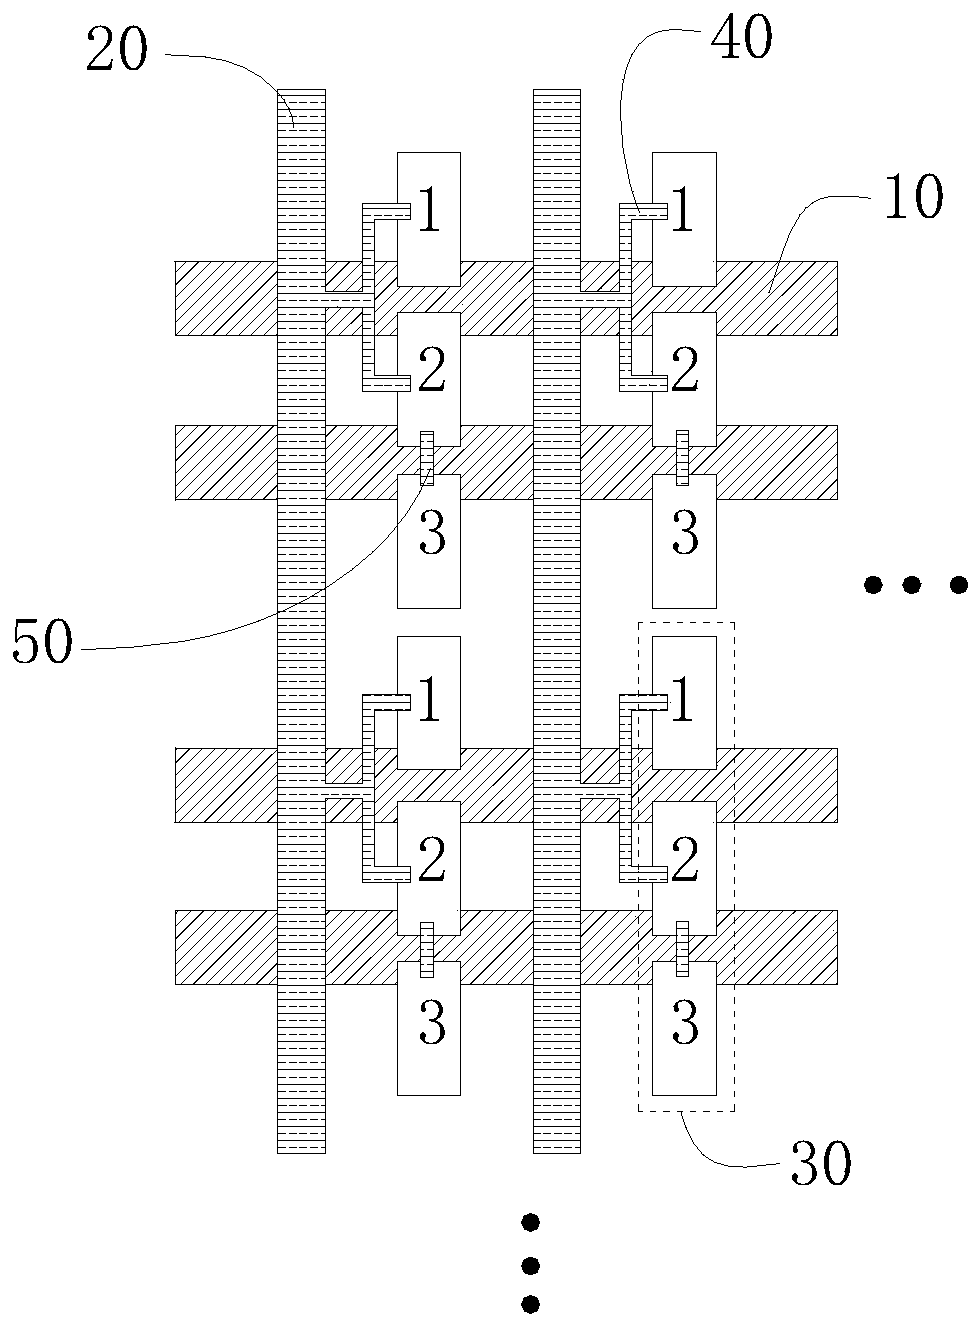 Pixel structure and display device of a liquid crystal display panel